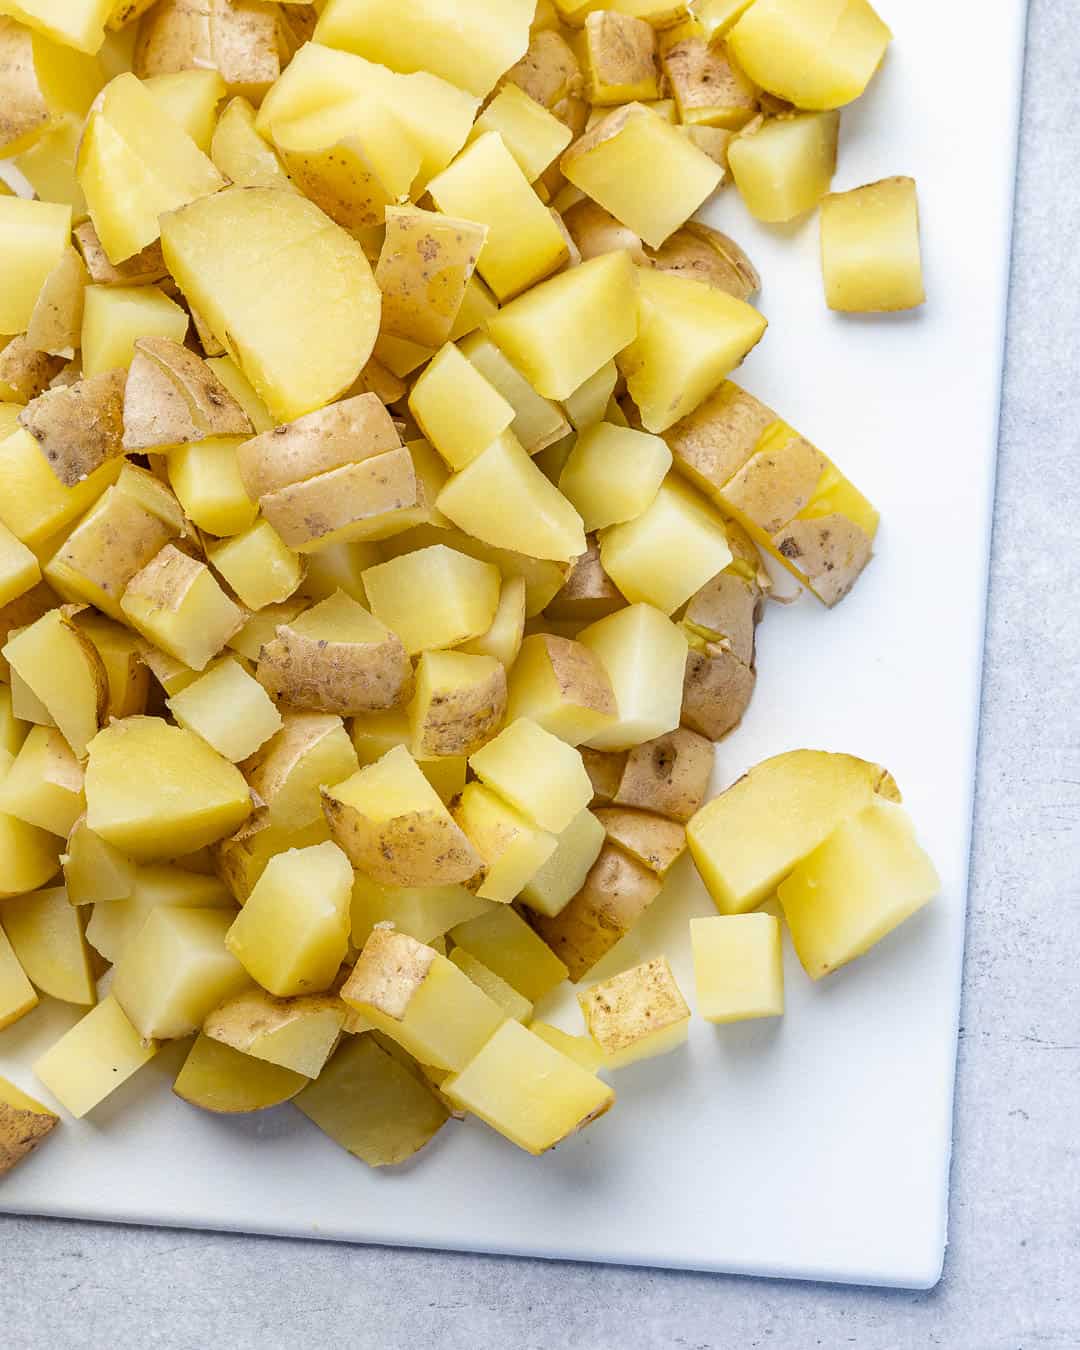 Potatoes cooked and chopped on cutting board